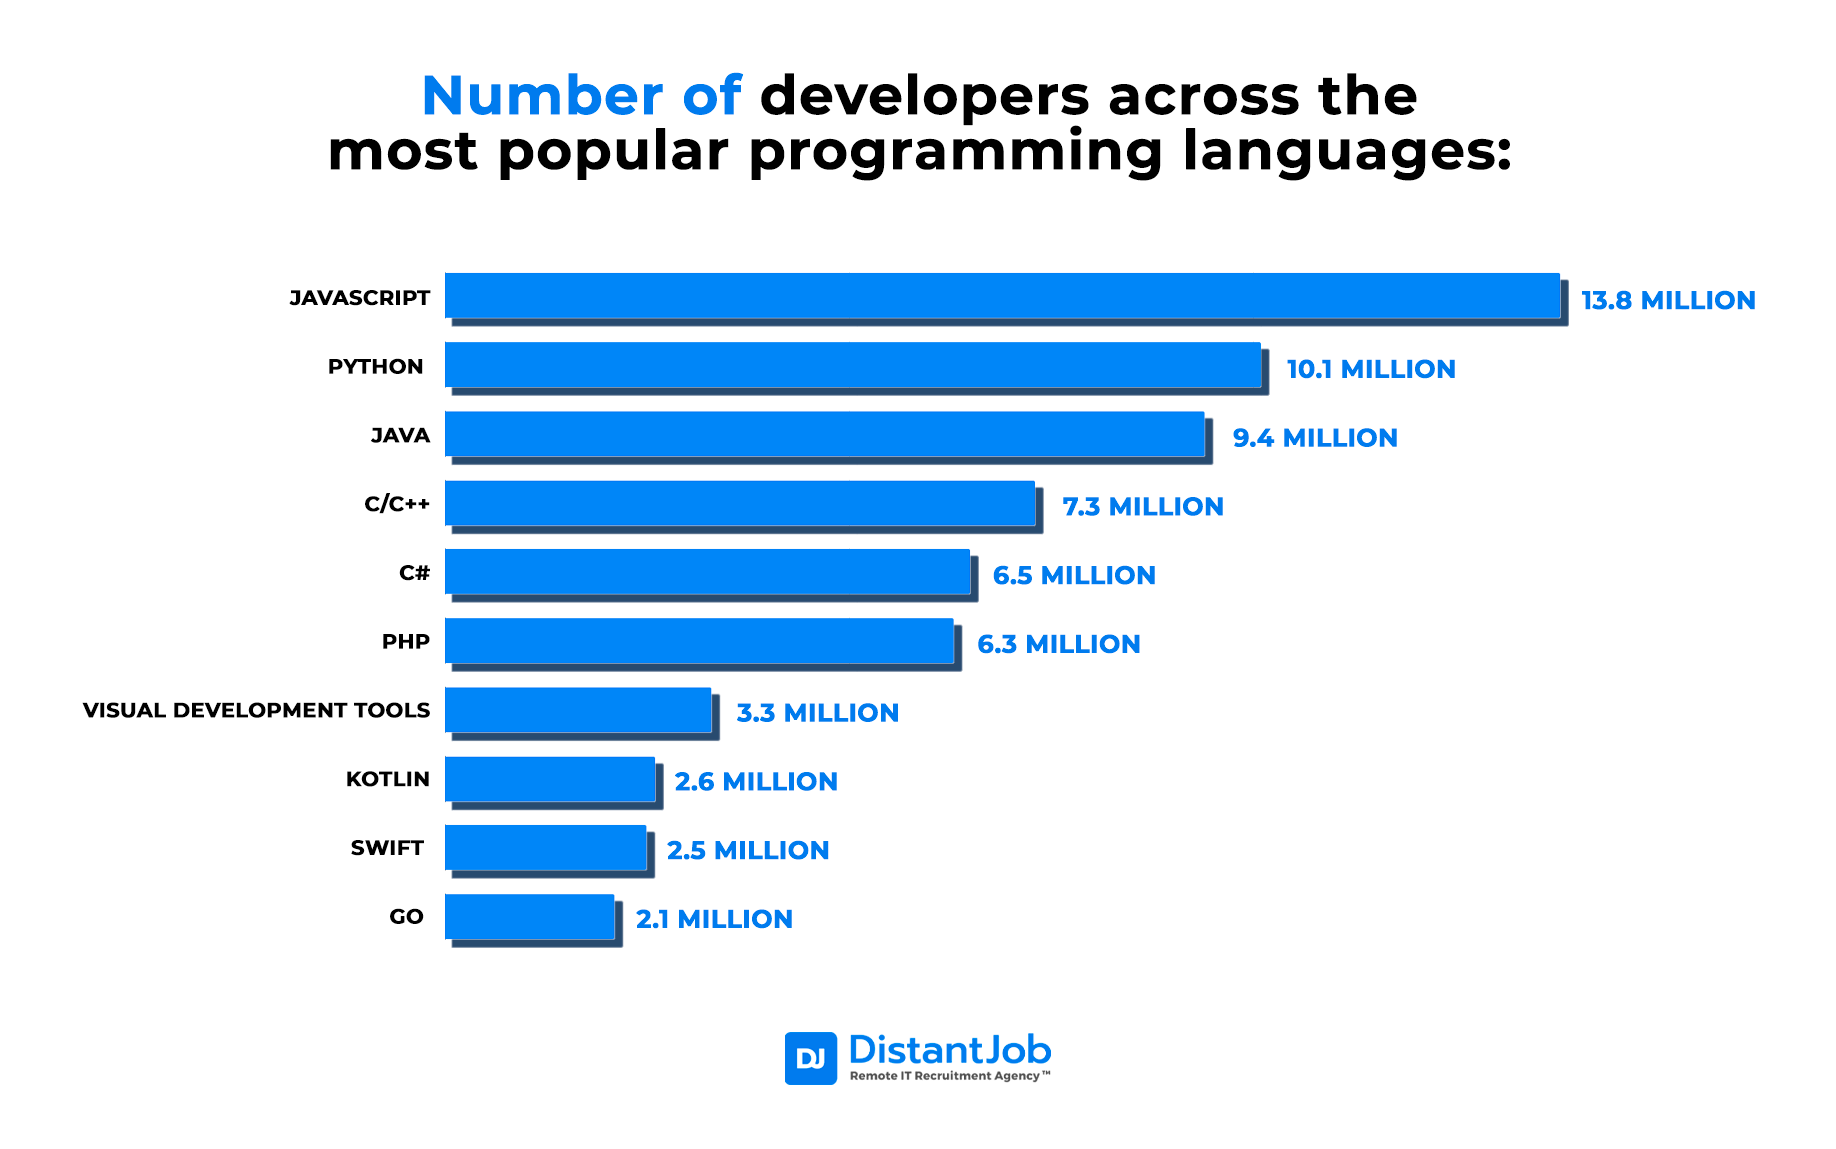 Number of developers across the most popular programming languages